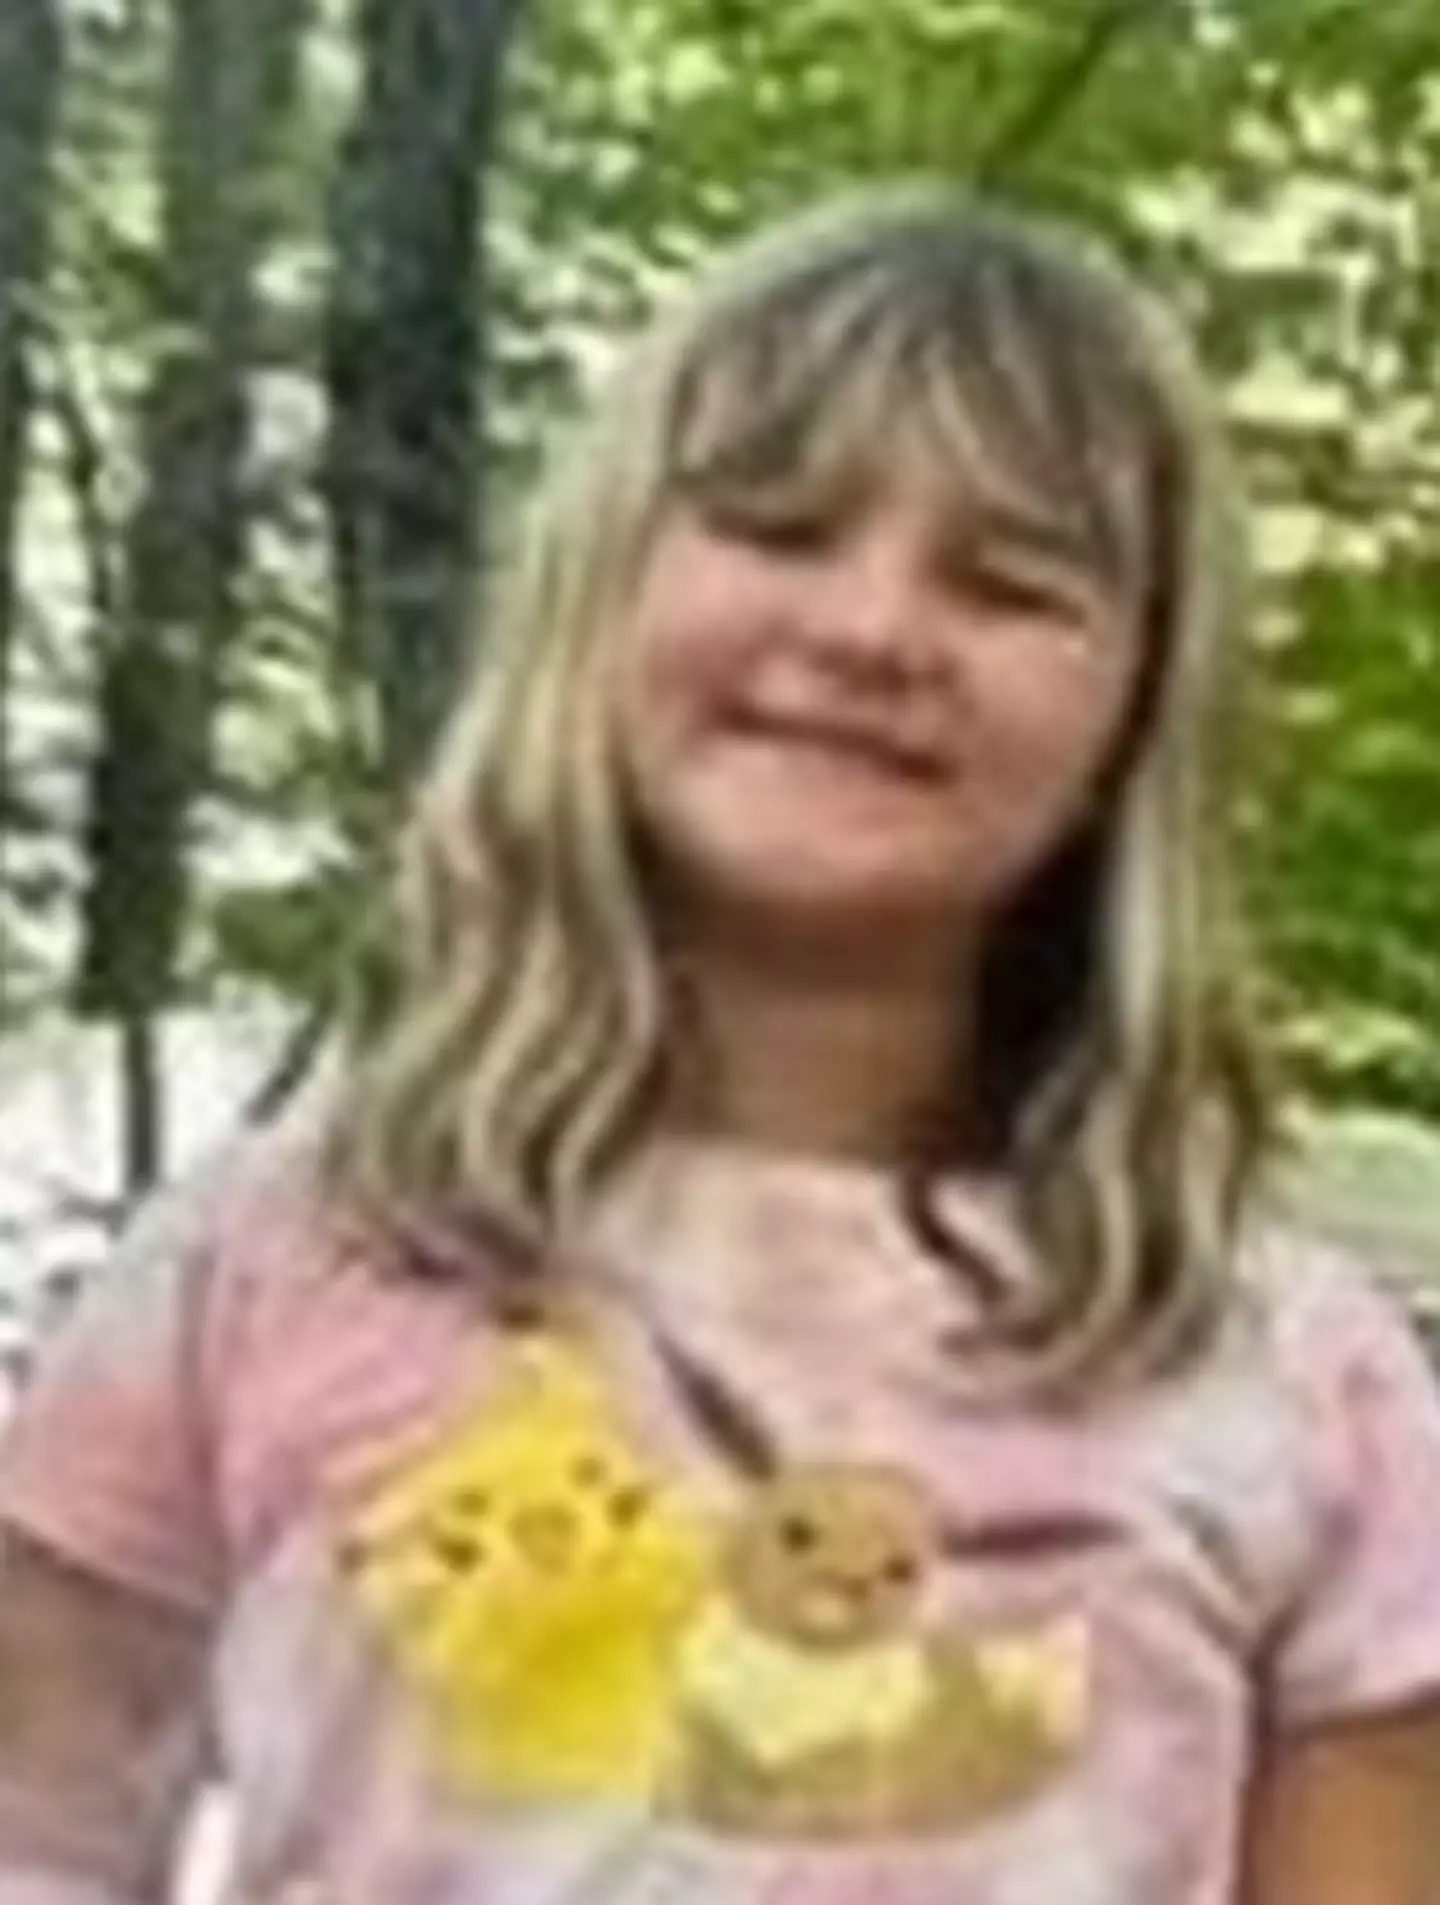 Nine-year-old Charlotte went missing on Saturday (31 September).